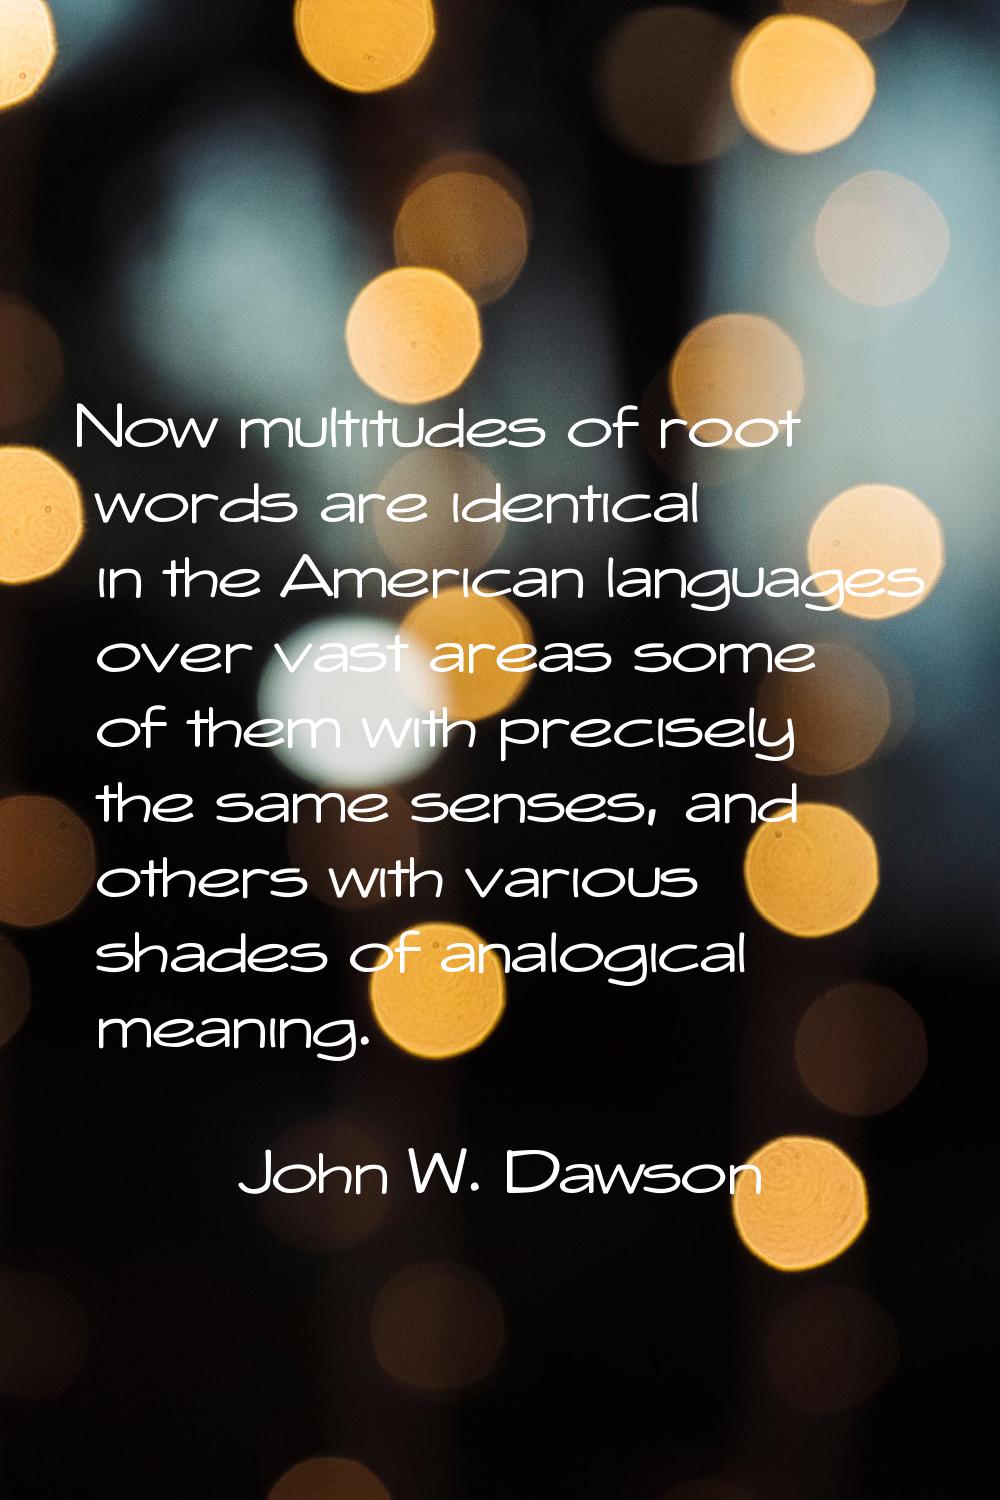 Now multitudes of root words are identical in the American languages over vast areas some of them w